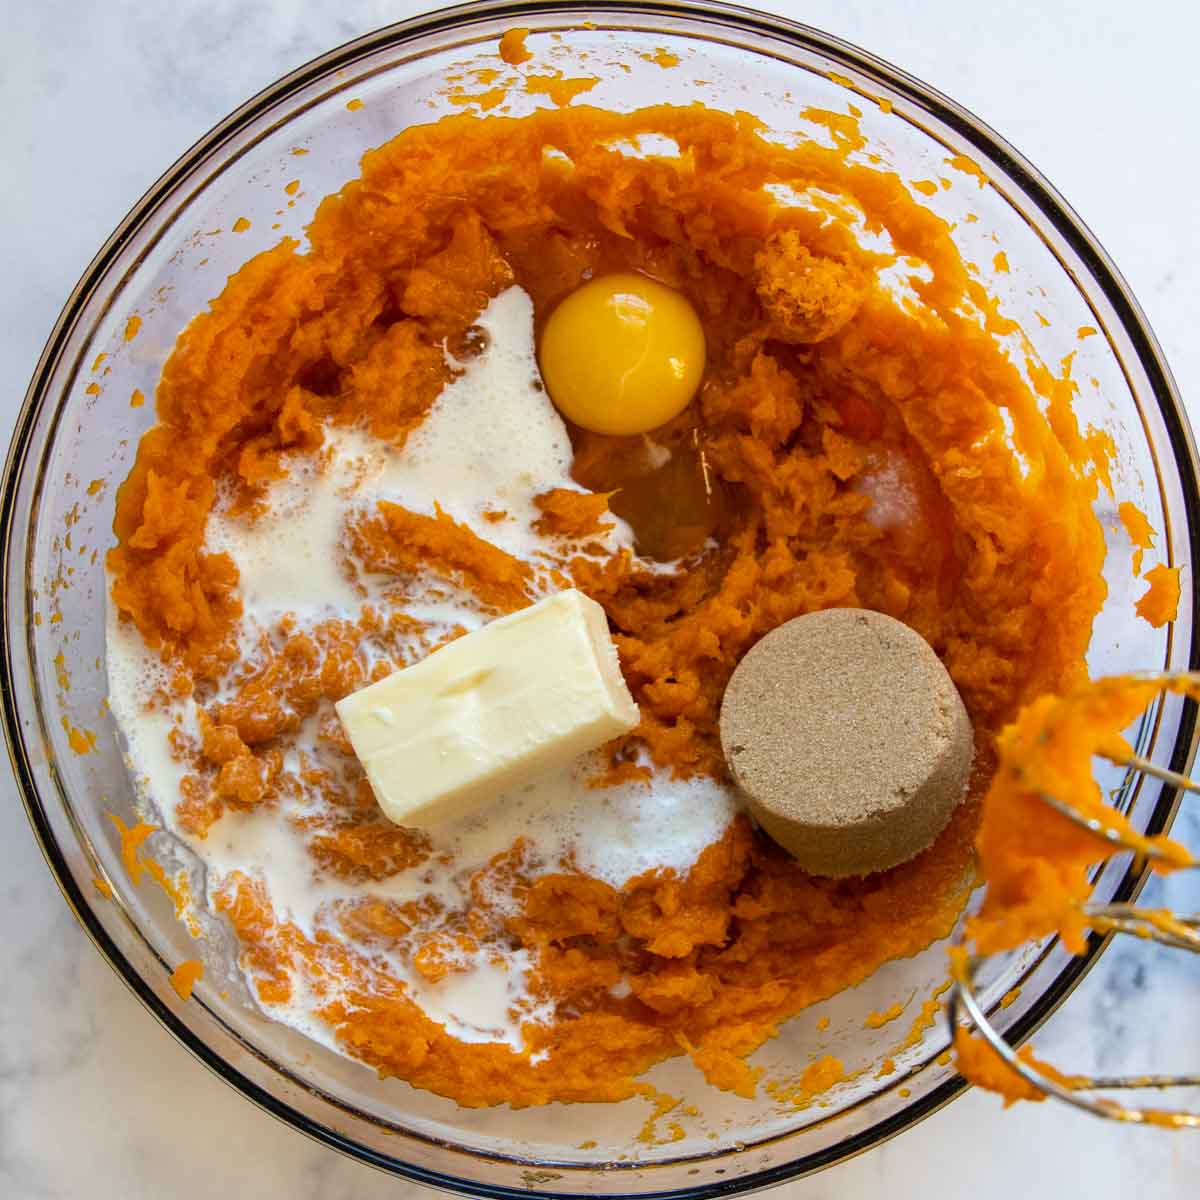 egg, cream, brown sugar, and butter added to the mashed sweet potatoes.